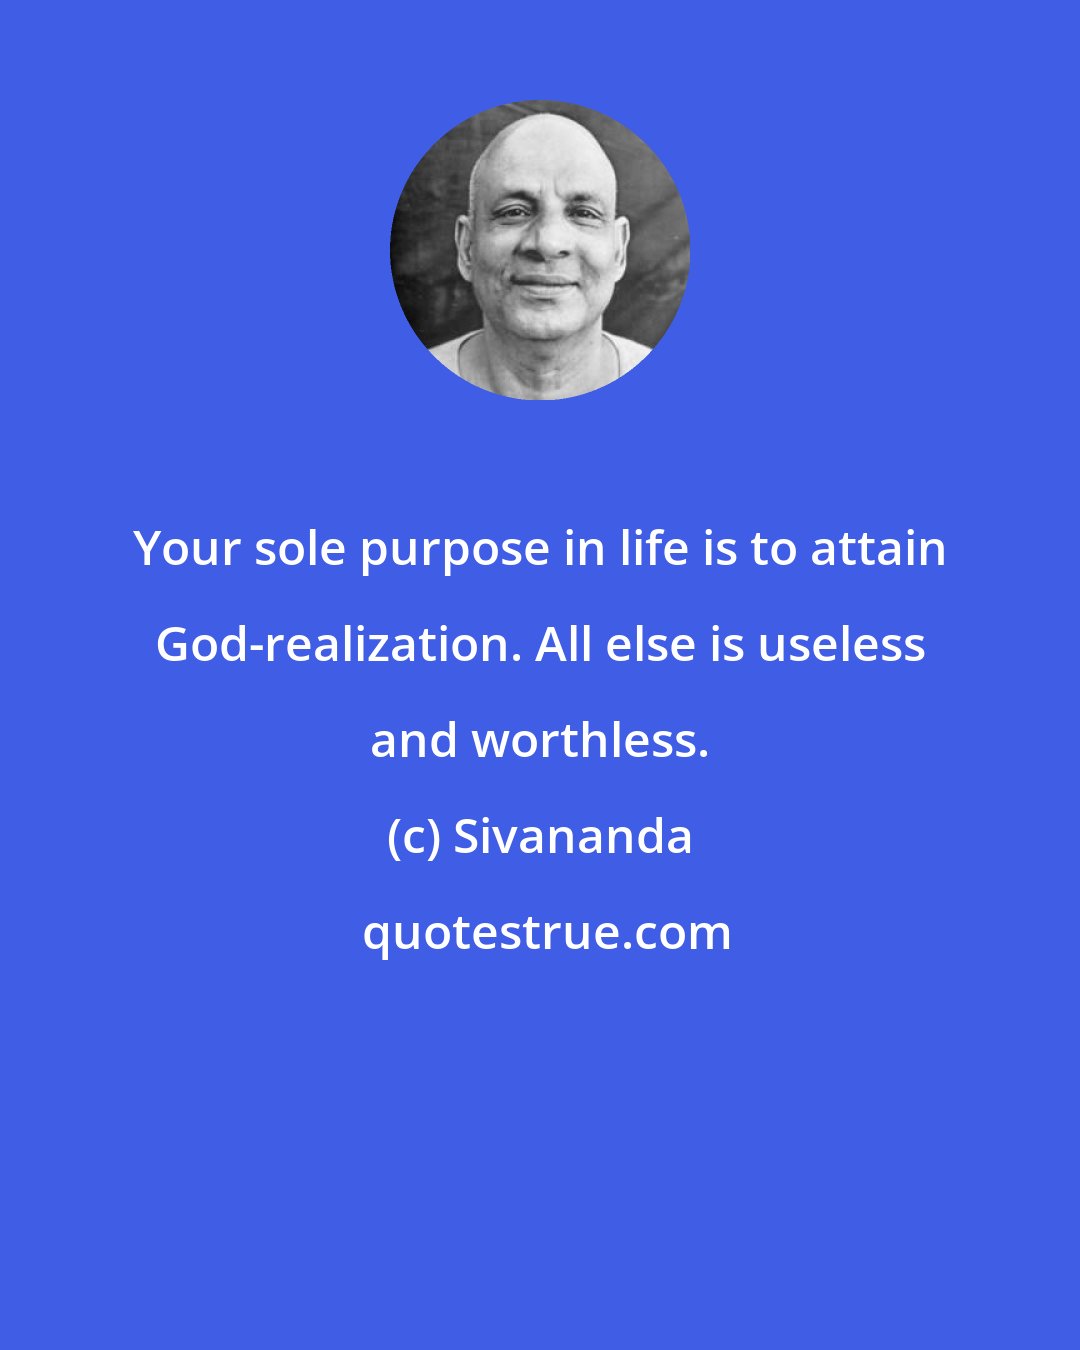 Sivananda: Your sole purpose in life is to attain God-realization. All else is useless and worthless.